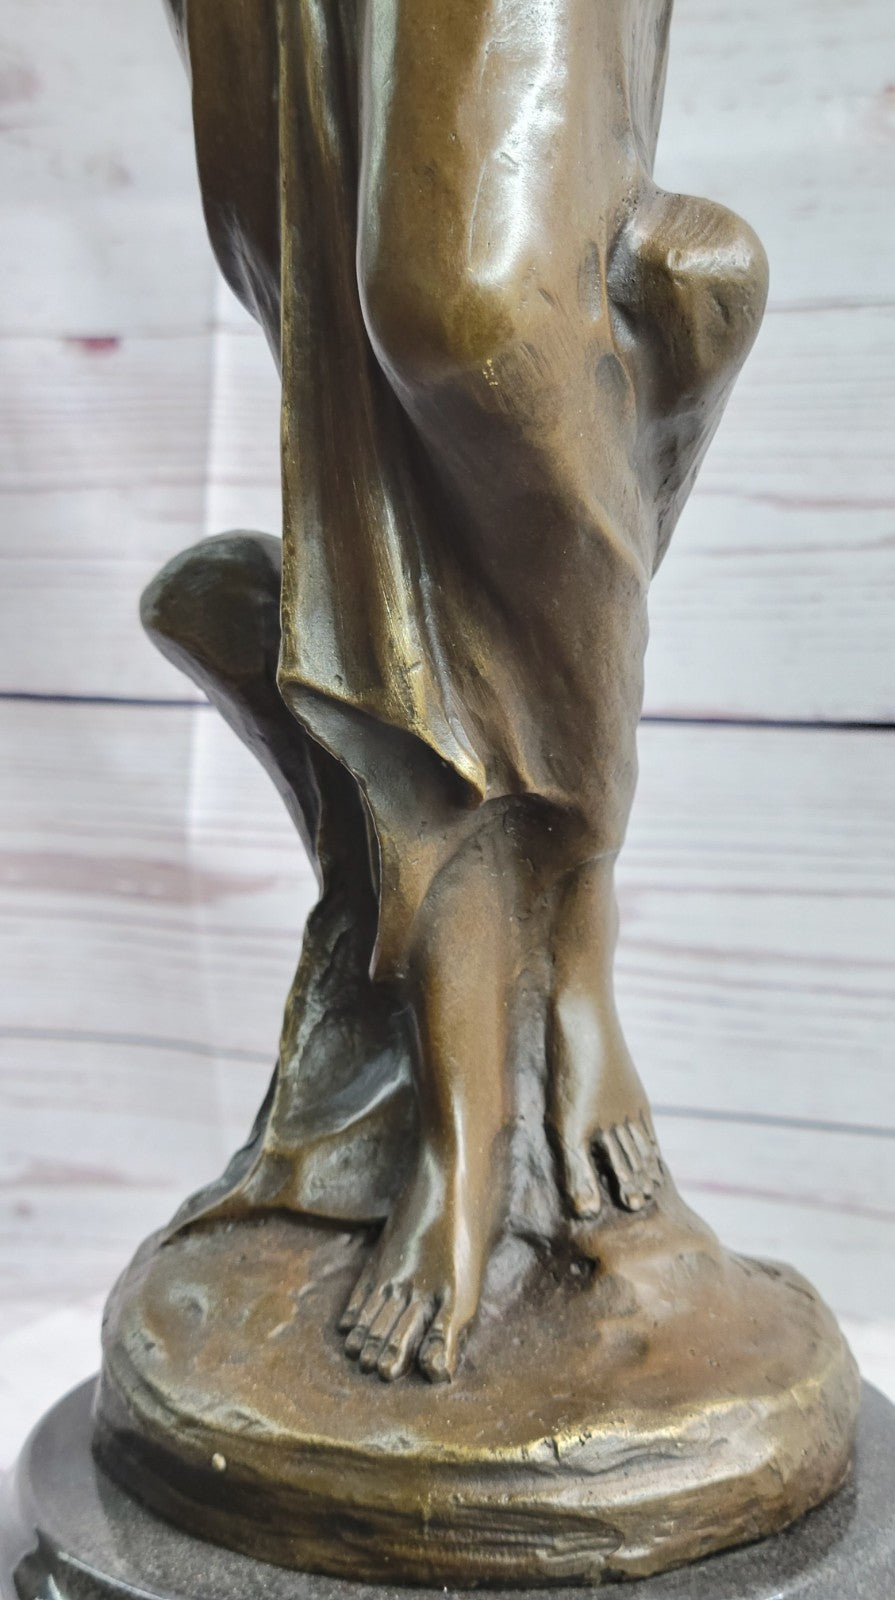 Collectible Art Deco Bronze Figurine of a Woman, Representing the Essence of Spring Sculpture